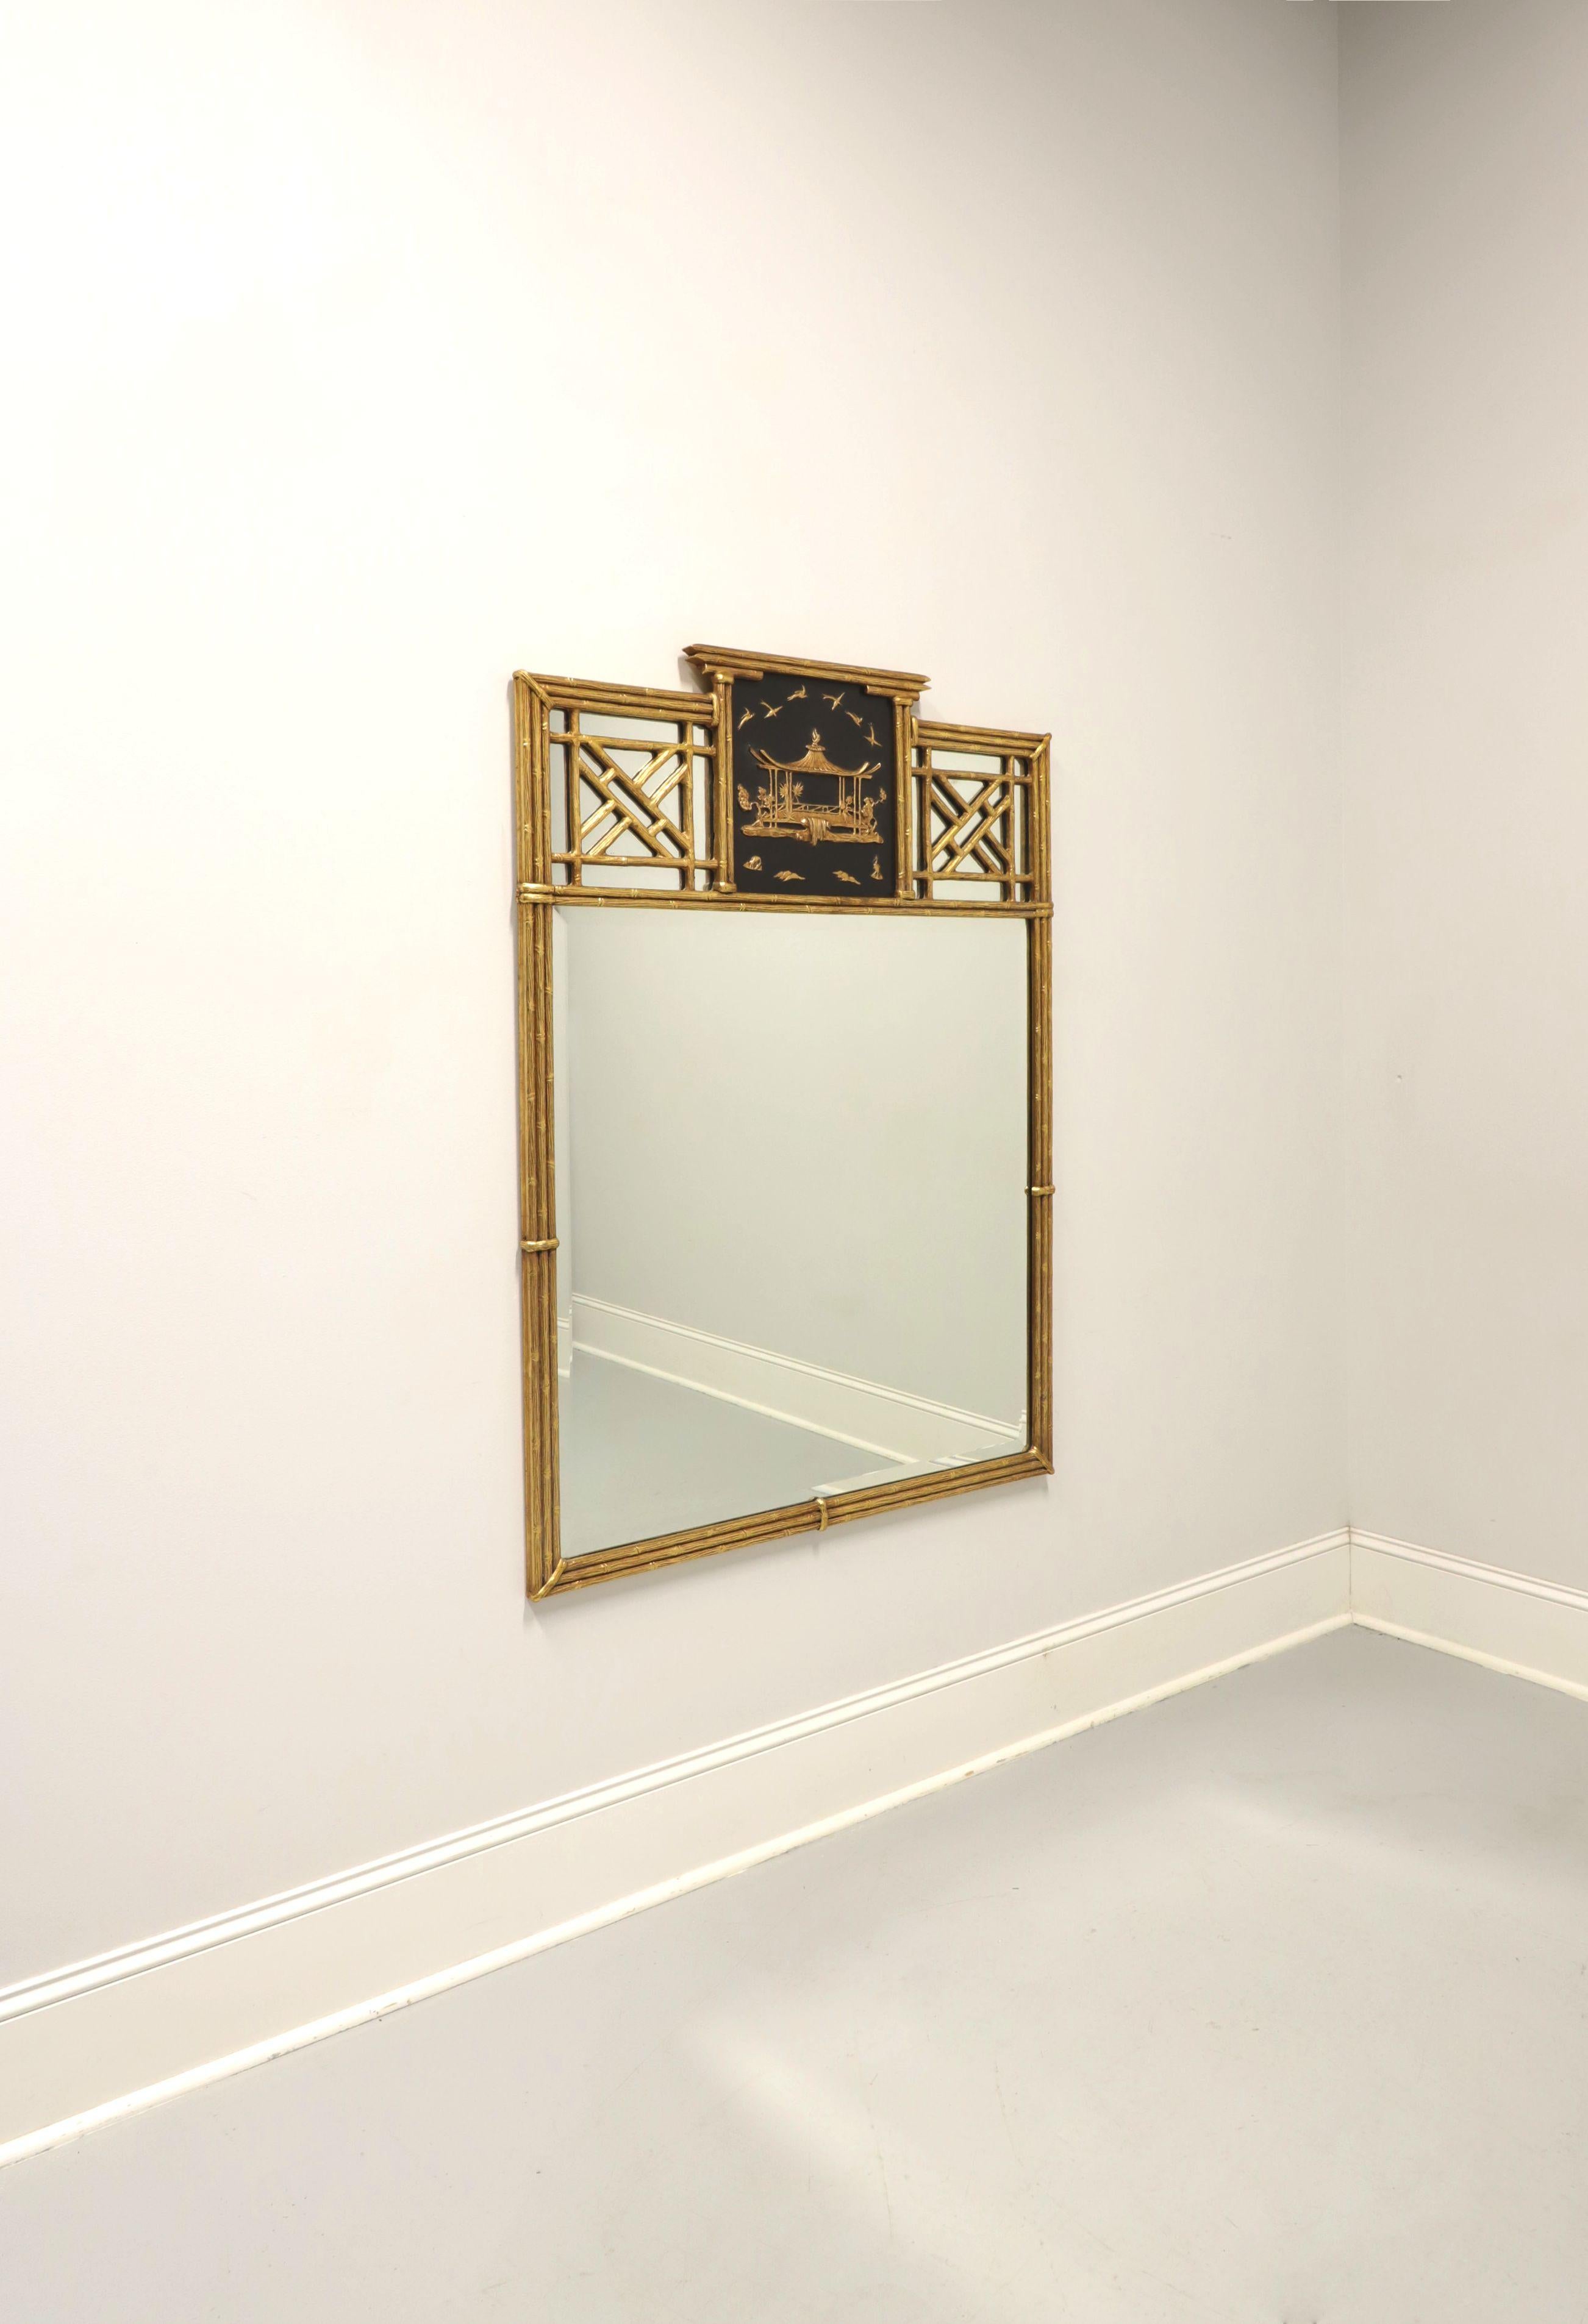 An Asian Japanese style wall mirror by Friedman Brothers. Beveled mirror glass in a rectangular shaped faux bamboo gold gilt painted frame with a top center panel of a floating golden pagoda & sea birds on a black background, and decorative faux